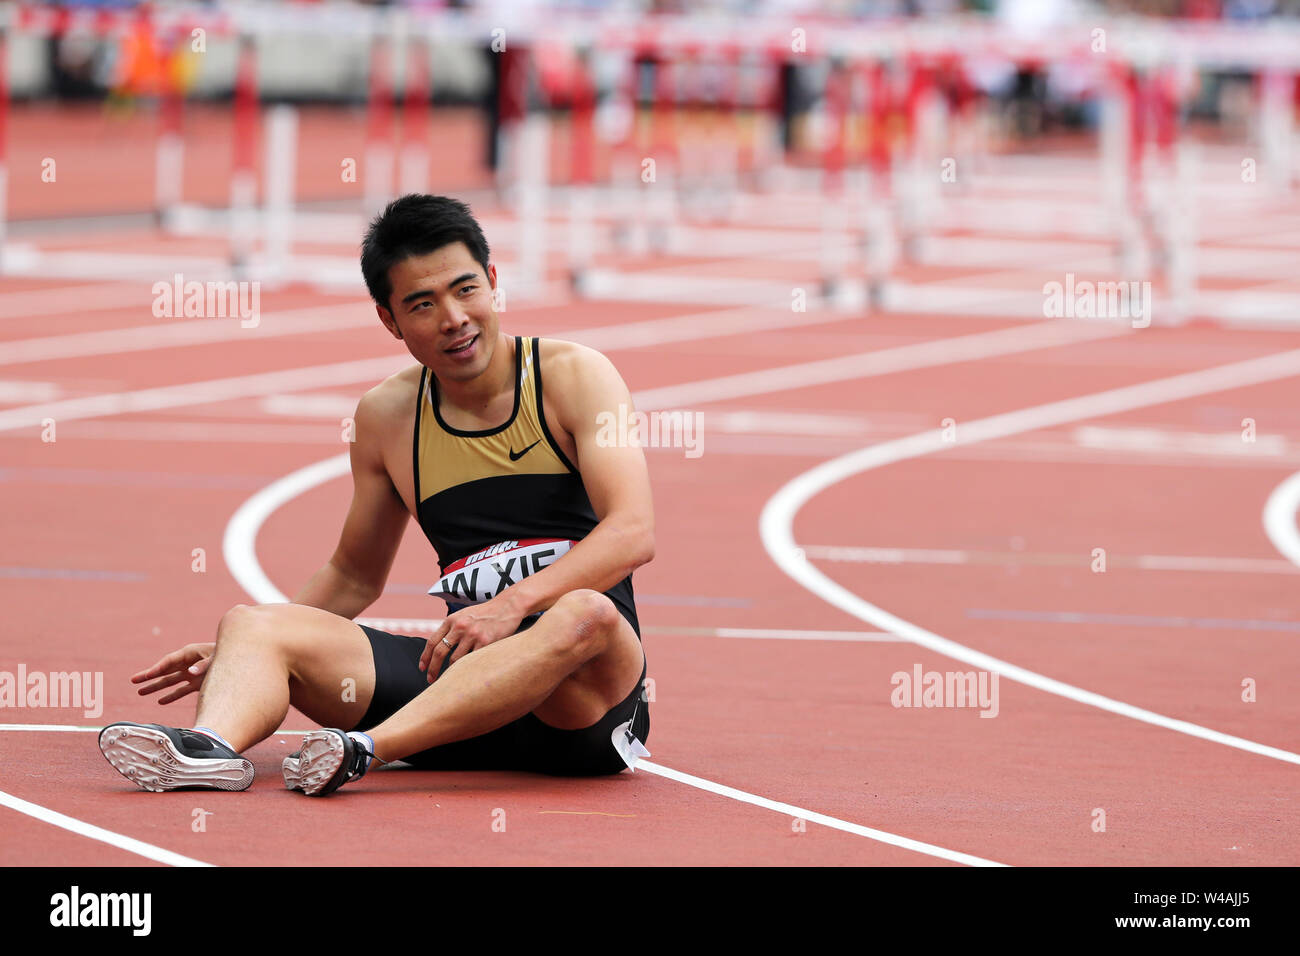 London, UK. 21st July 19. Wenjun XIE (China) celebrating victory in the Men's 110m Hurdles Final at the 2019, IAAF Diamond League, Anniversary Games, Queen Elizabeth Olympic Park, Stratford, London, UK. Credit: Simon Balson/Alamy Live News Stock Photo